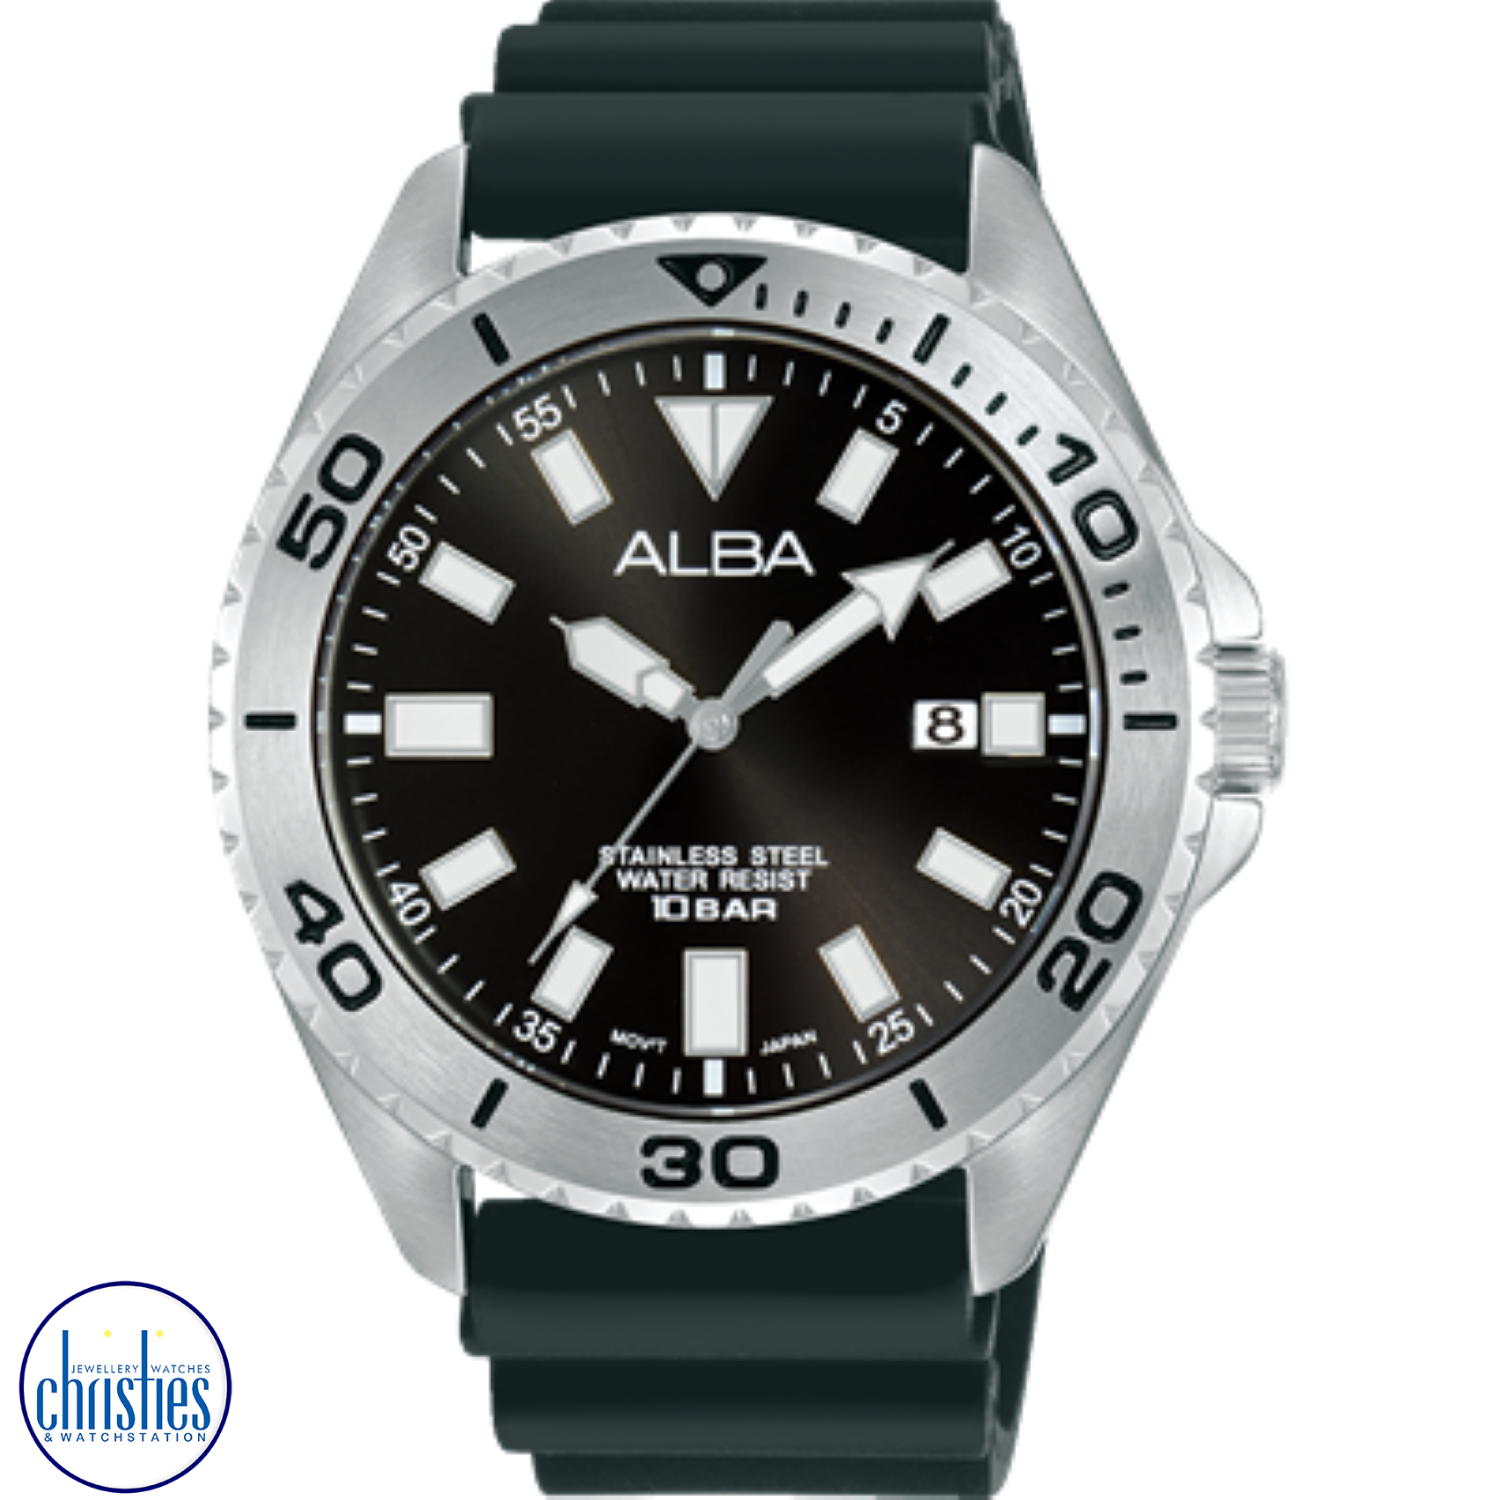 AS9Q49X ALBA WORKMAN SPORTS BLACK DIALWATCH. unique engagement rings nz  Alba AS9Q49X is an elegant and stylish mens analog watch that combines classic design with modern technology.